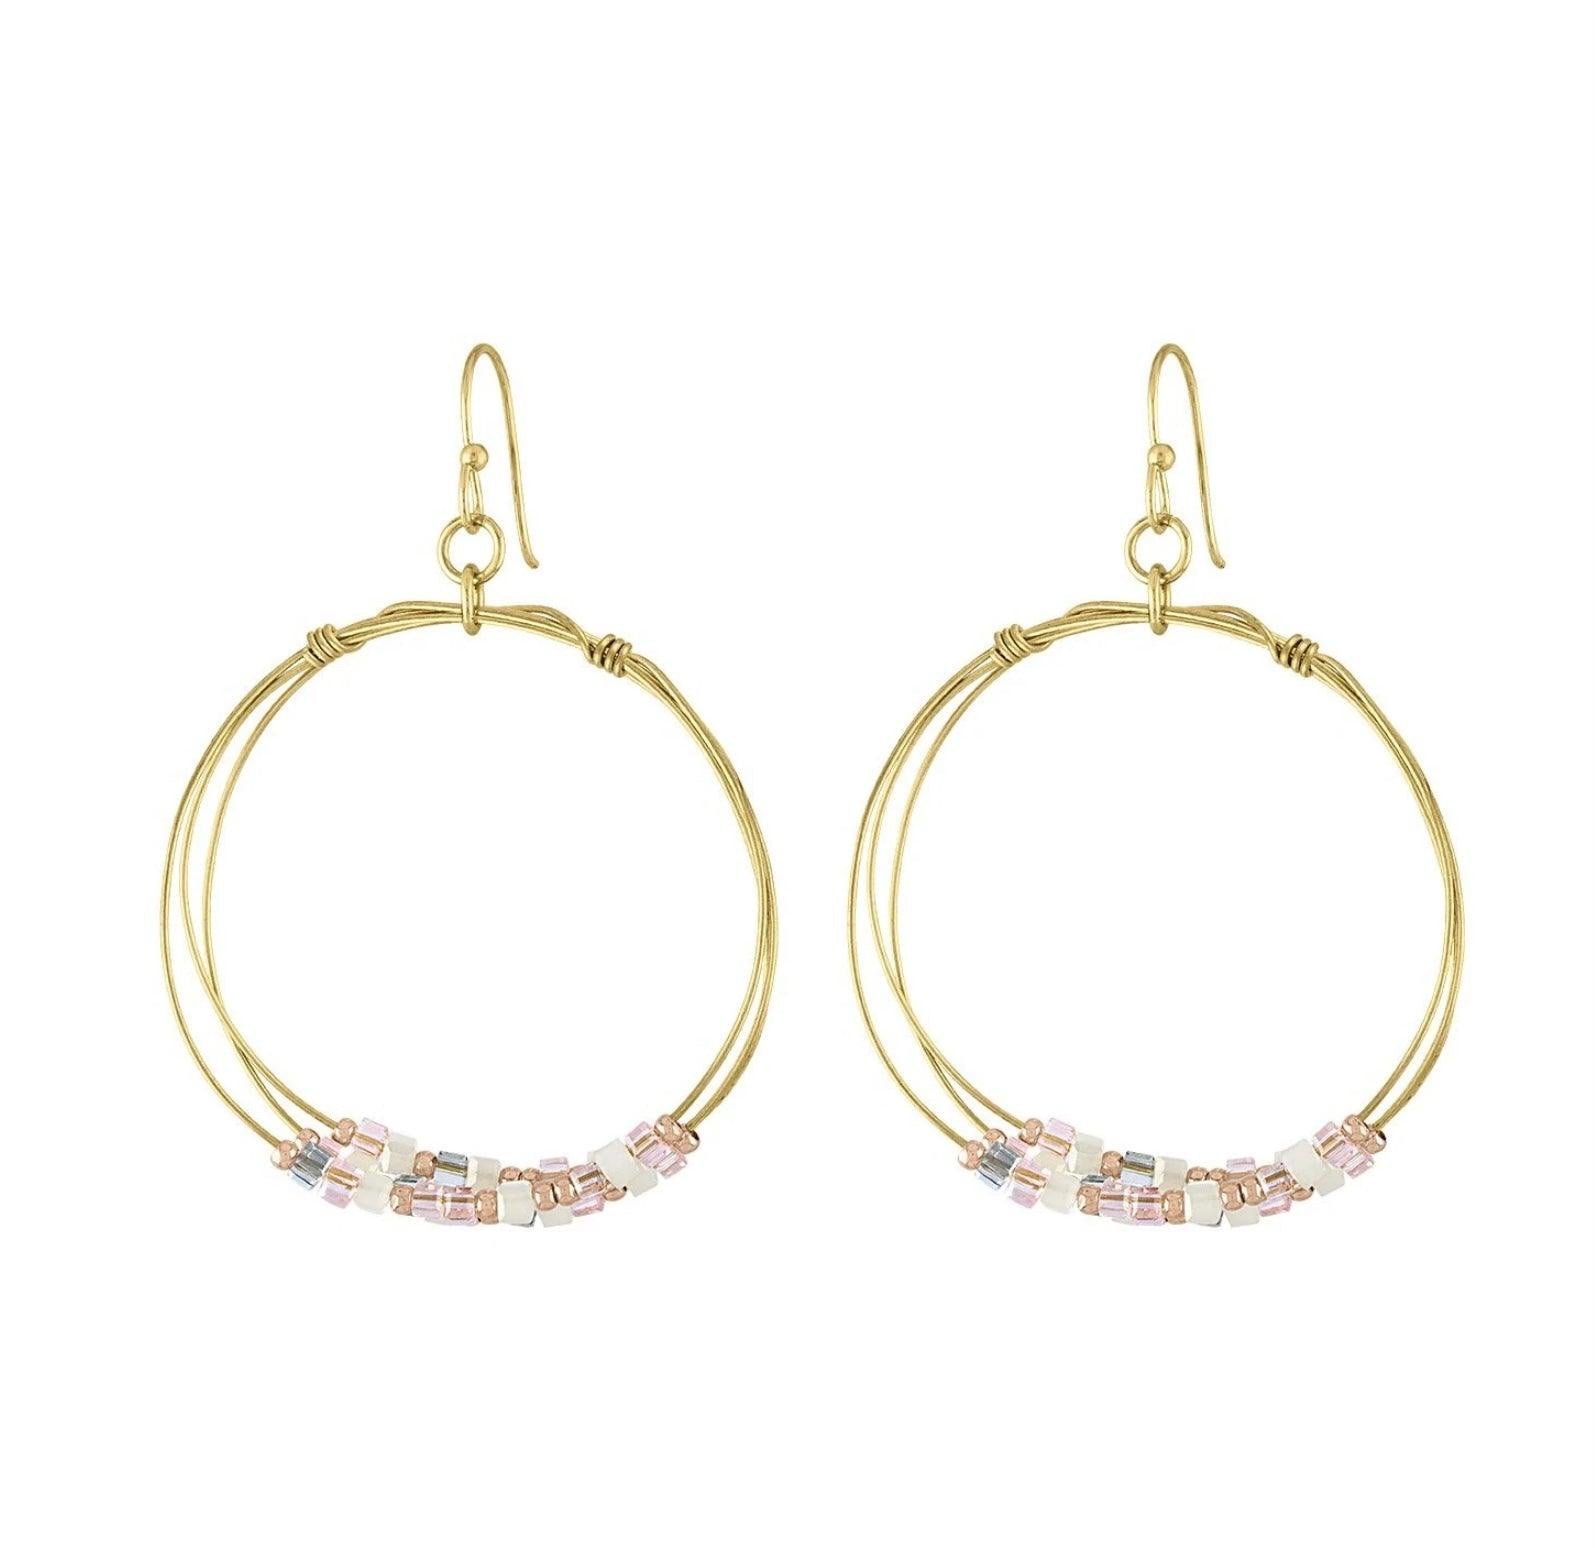 Piper and Jade Irridescent Beaded Hoop Earrings - Heritage-Boutique.com